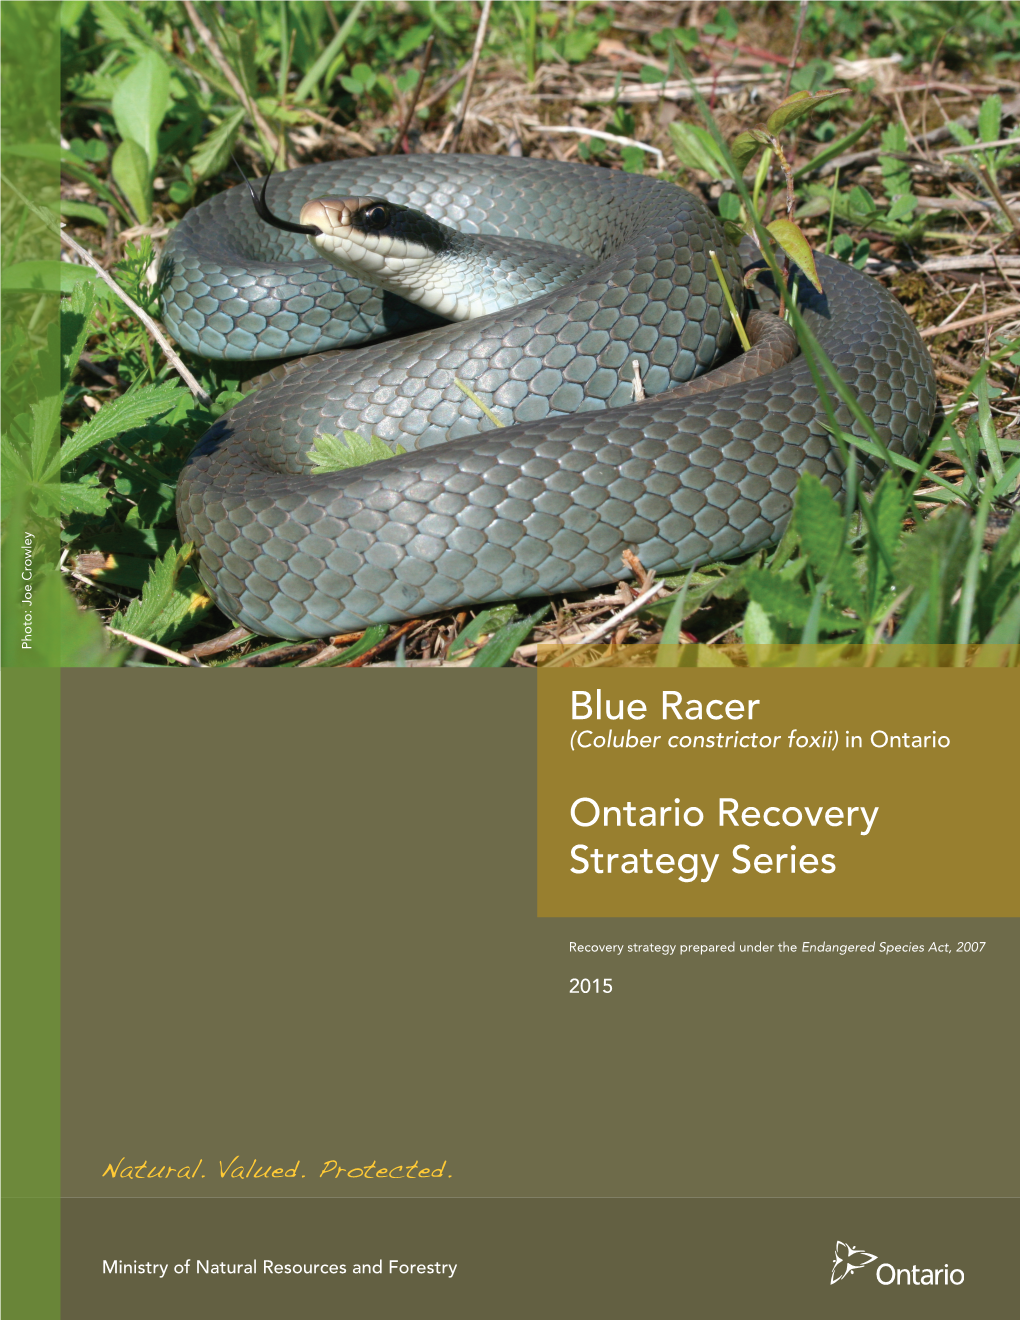 Coluber Constrictor Foxii) in Ontario